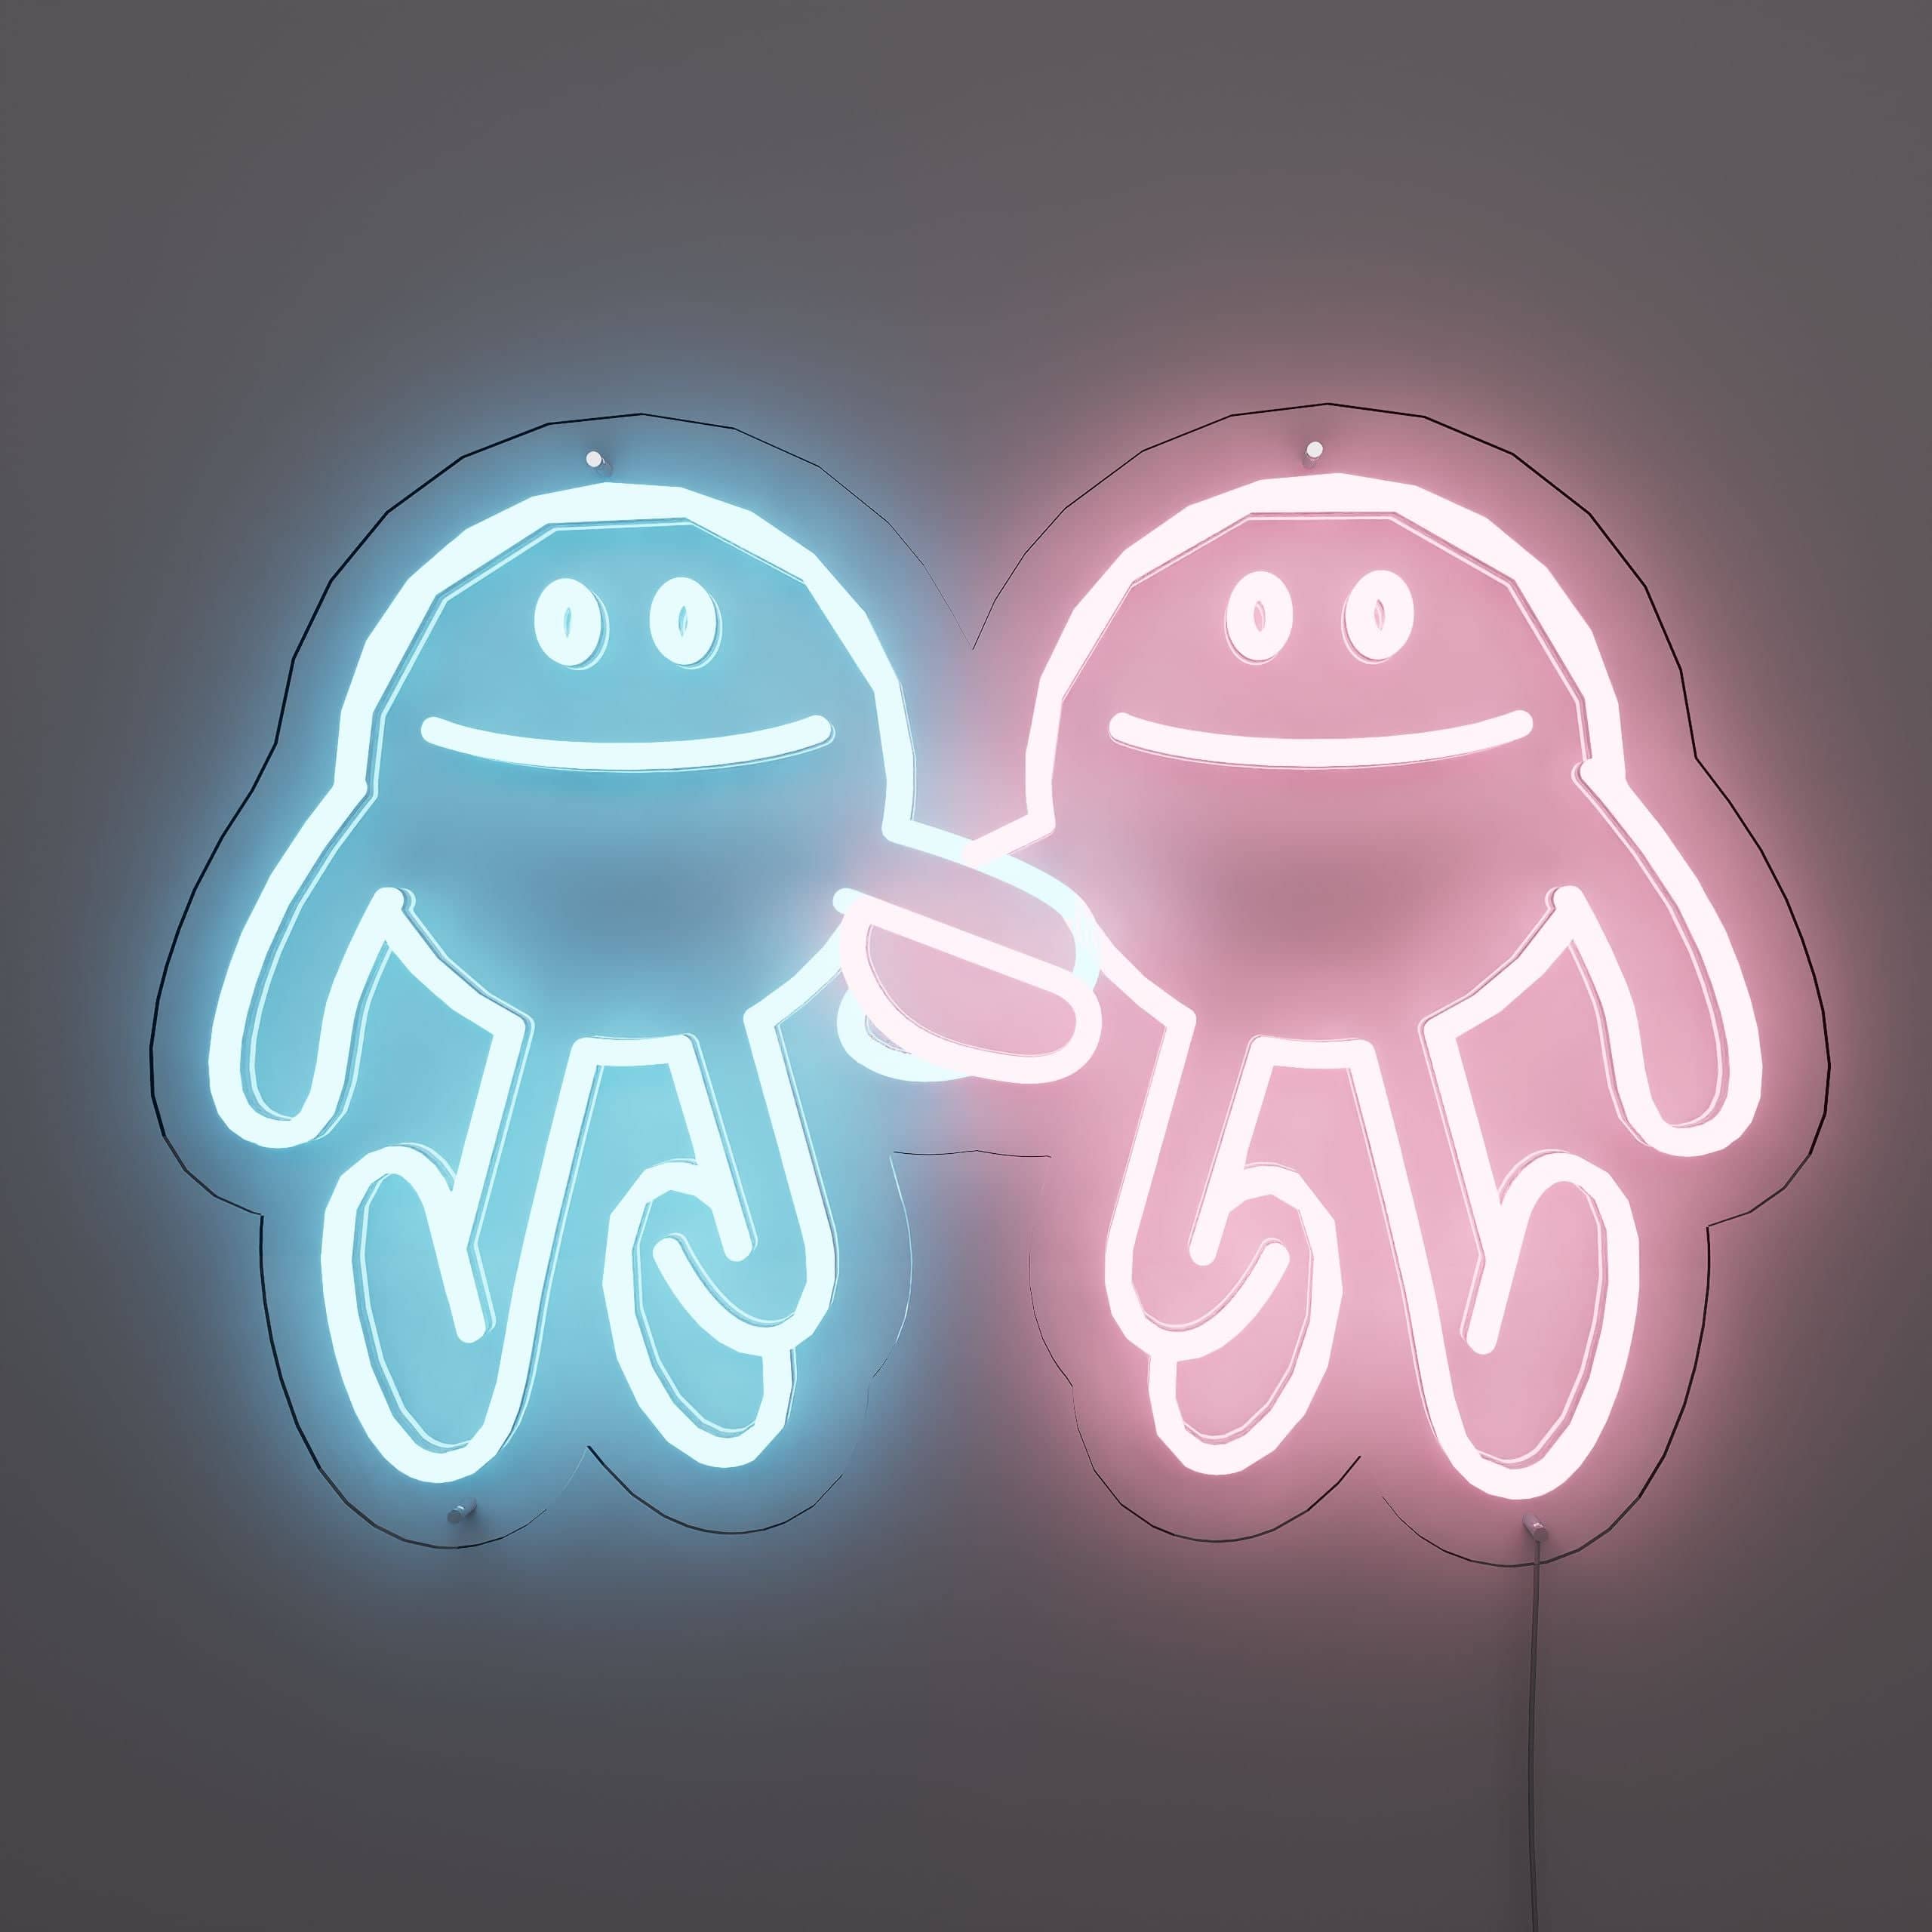 Funny neon signs with cheerful blue and pink figures